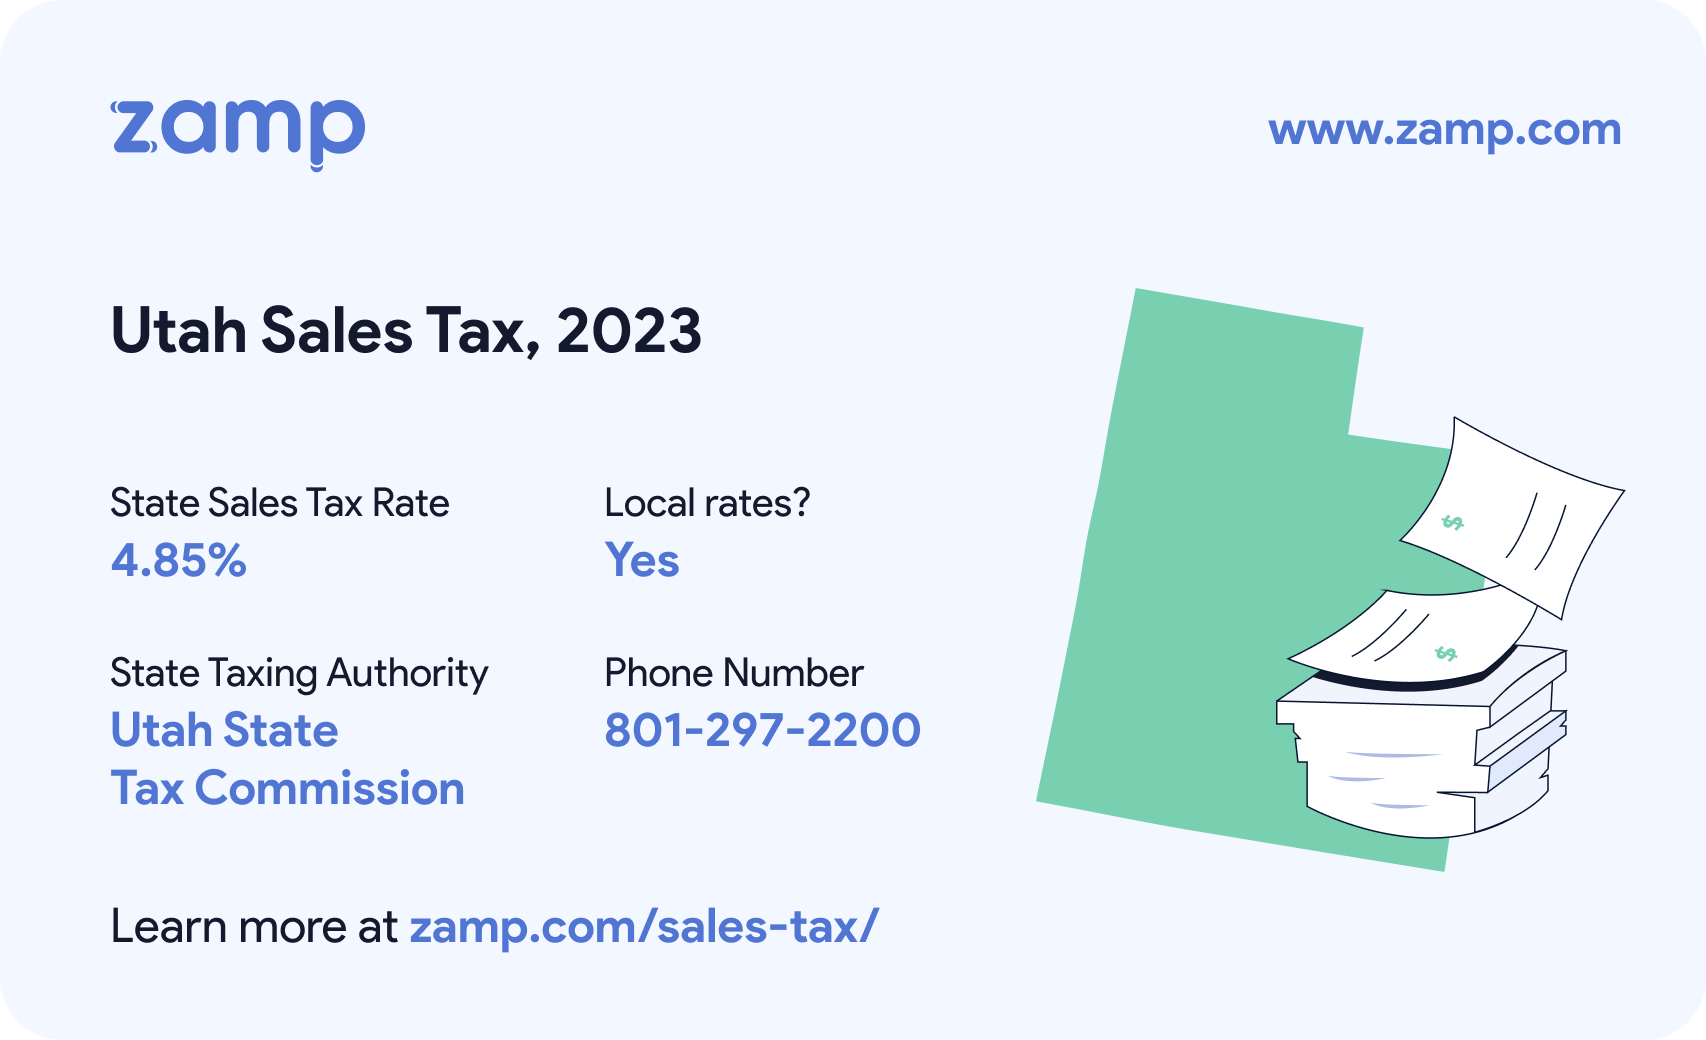 Utah basic sales tax info for 2023 - State sales tax rate: 4.85%, Local rates? Yes; State Taxing Authority: Utah State Tax Commission; and phone number 801-297-2200